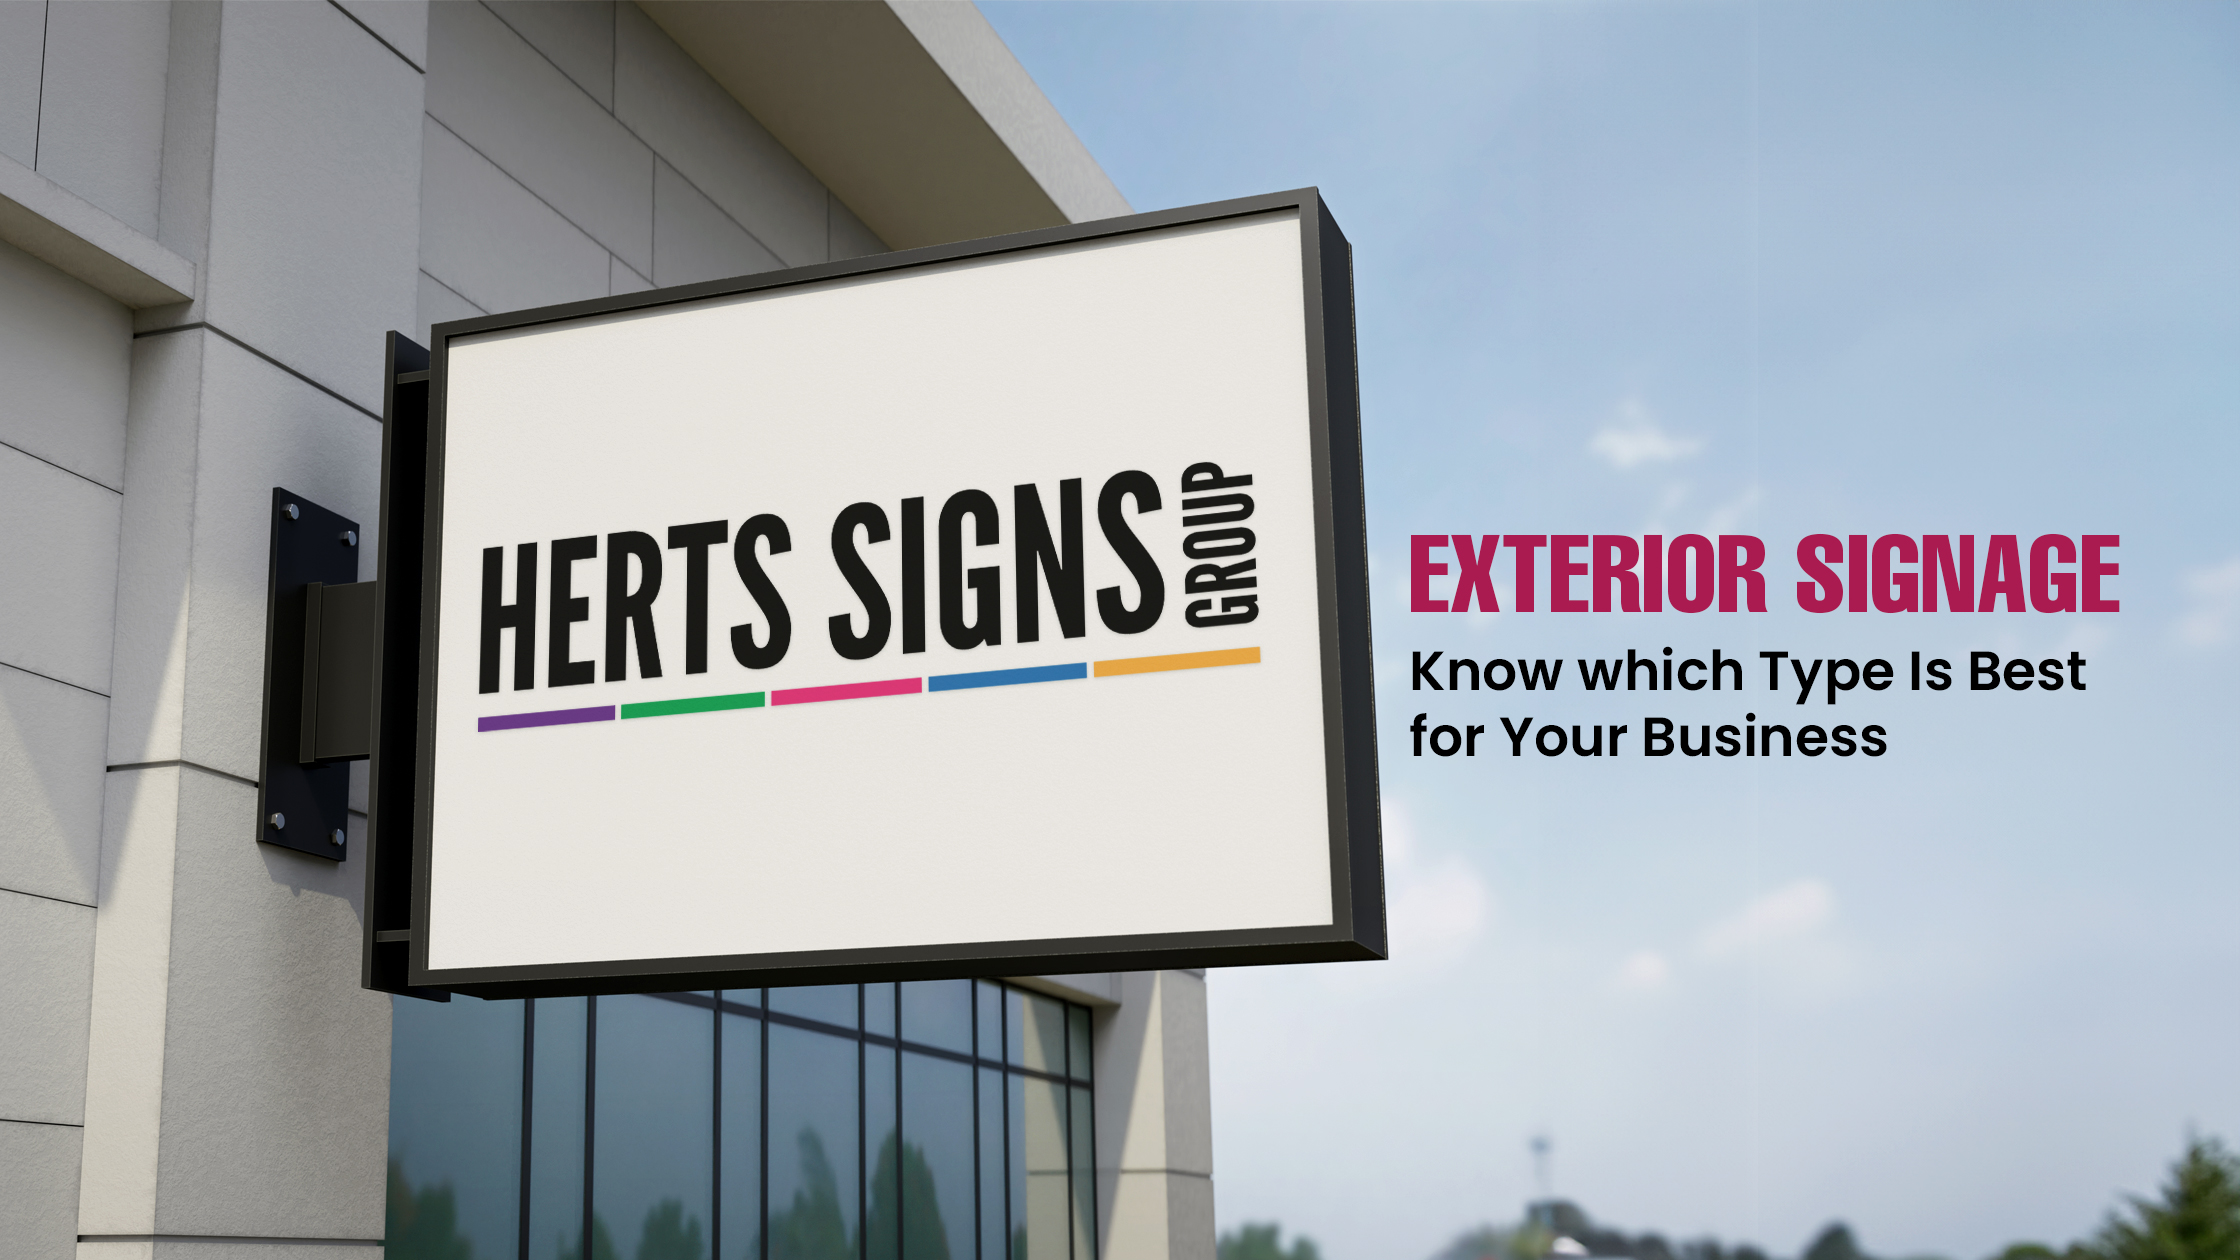 Exterior Signage - Know which Type is best for your business